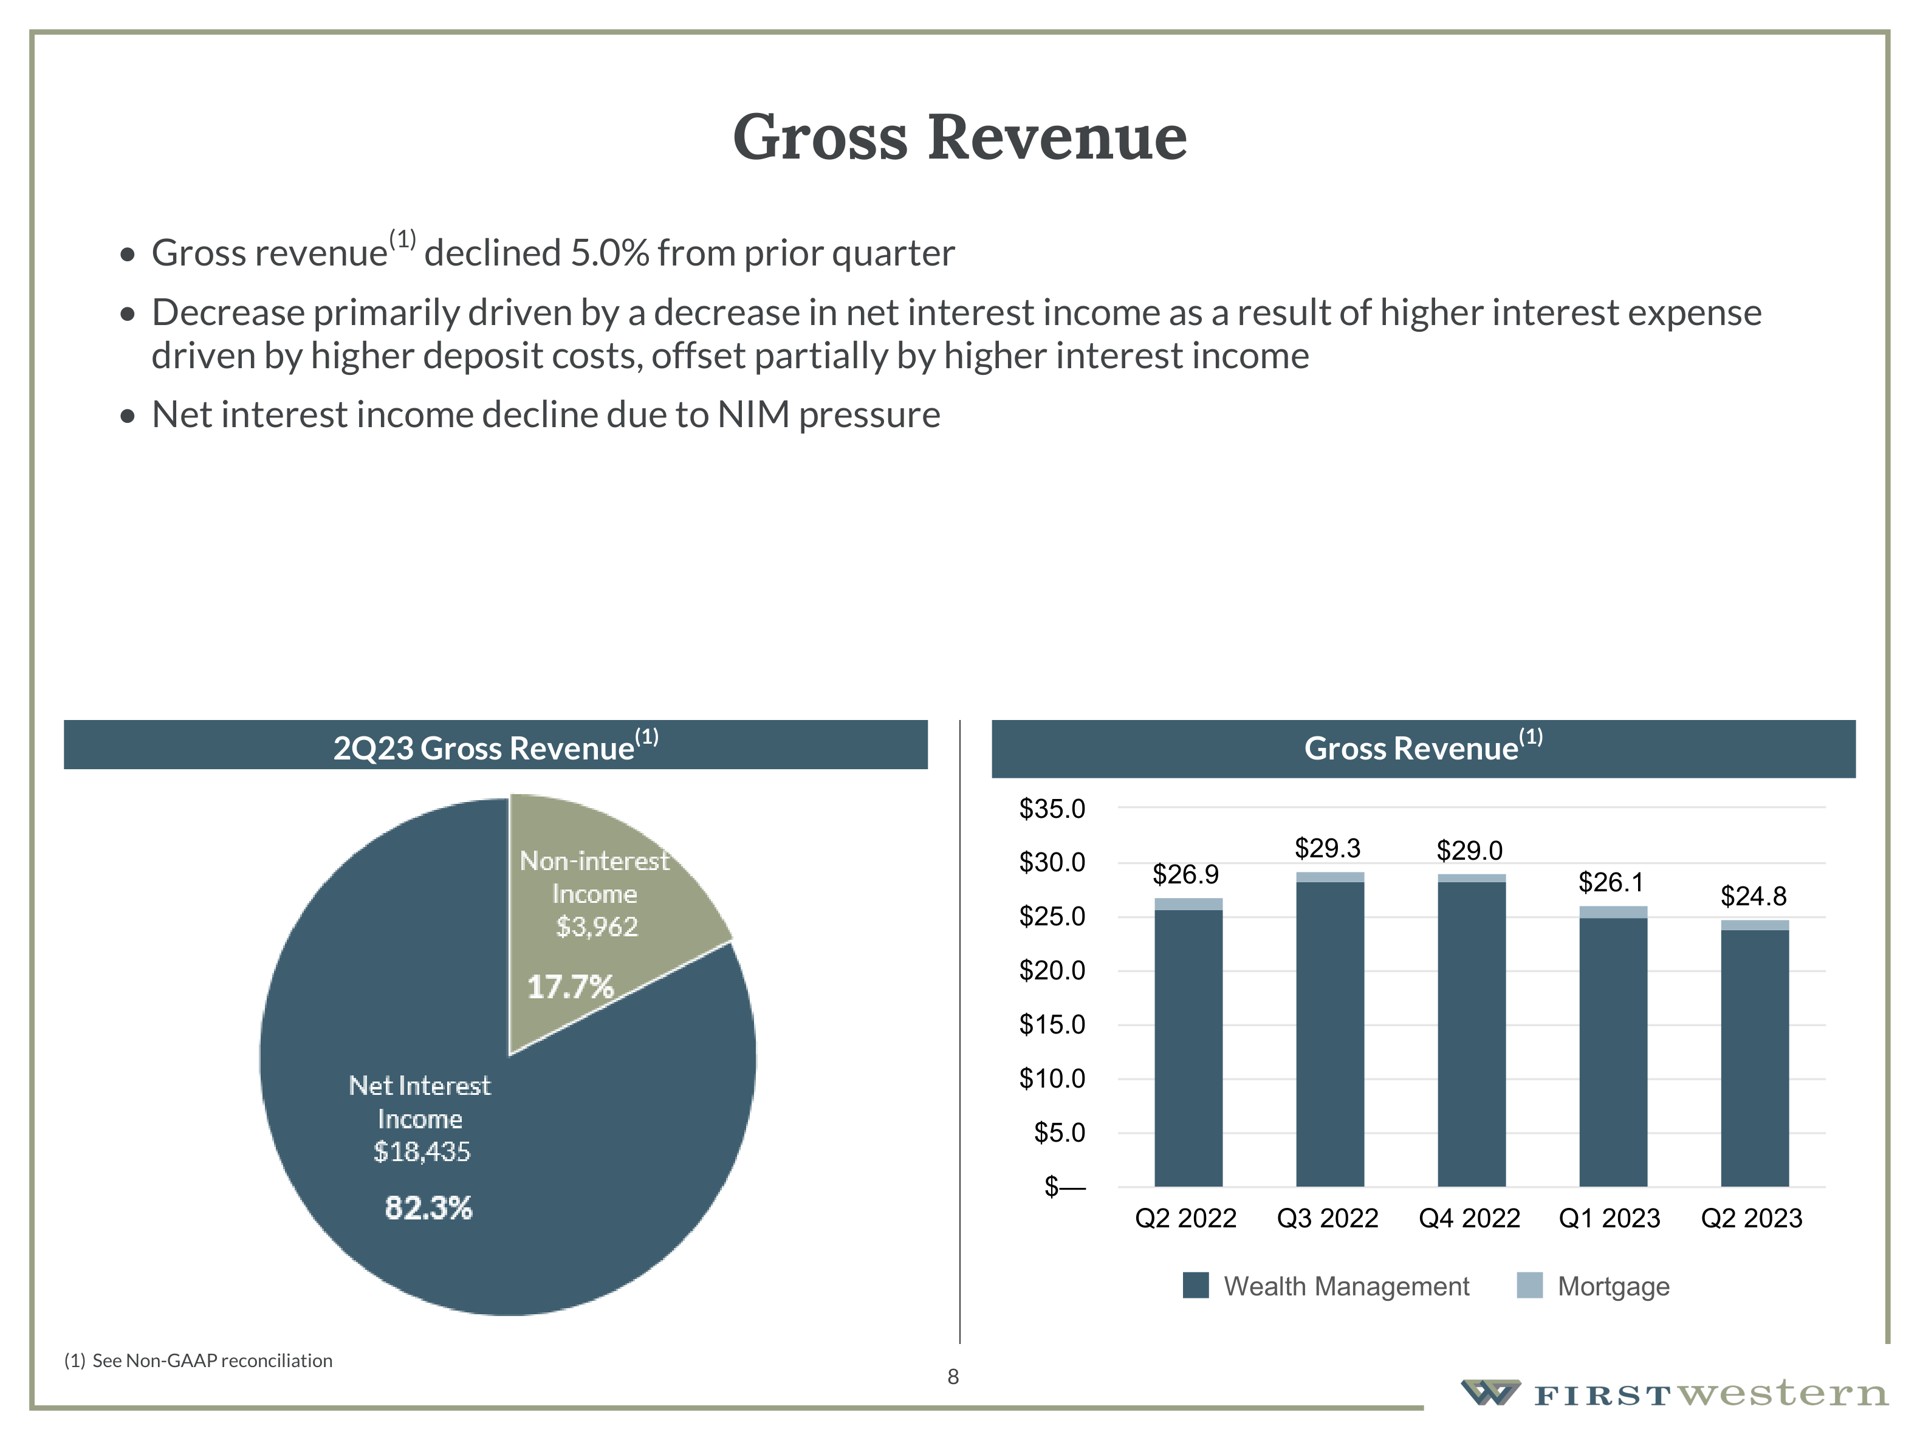 gross revenue gross revenue declined from prior quarter decrease primarily driven by a decrease in net interest income as a result of higher interest expense driven by higher deposit costs offset partially by higher interest income net interest income decline due to nim pressure gross revenue gross revenue | First Western Financial